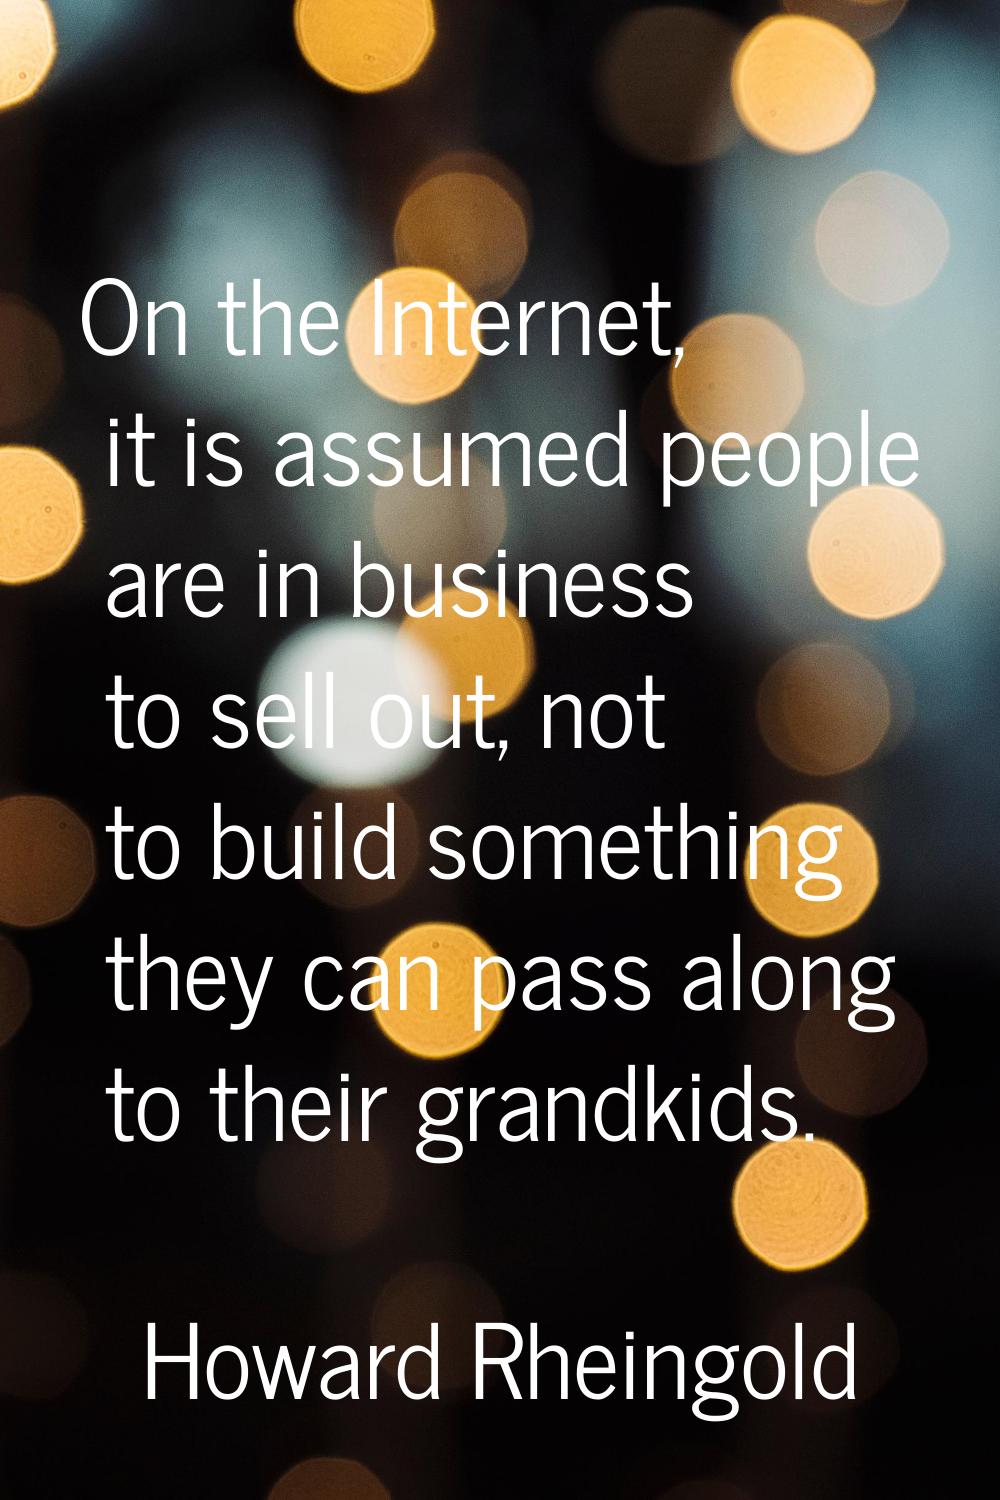 On the Internet, it is assumed people are in business to sell out, not to build something they can 